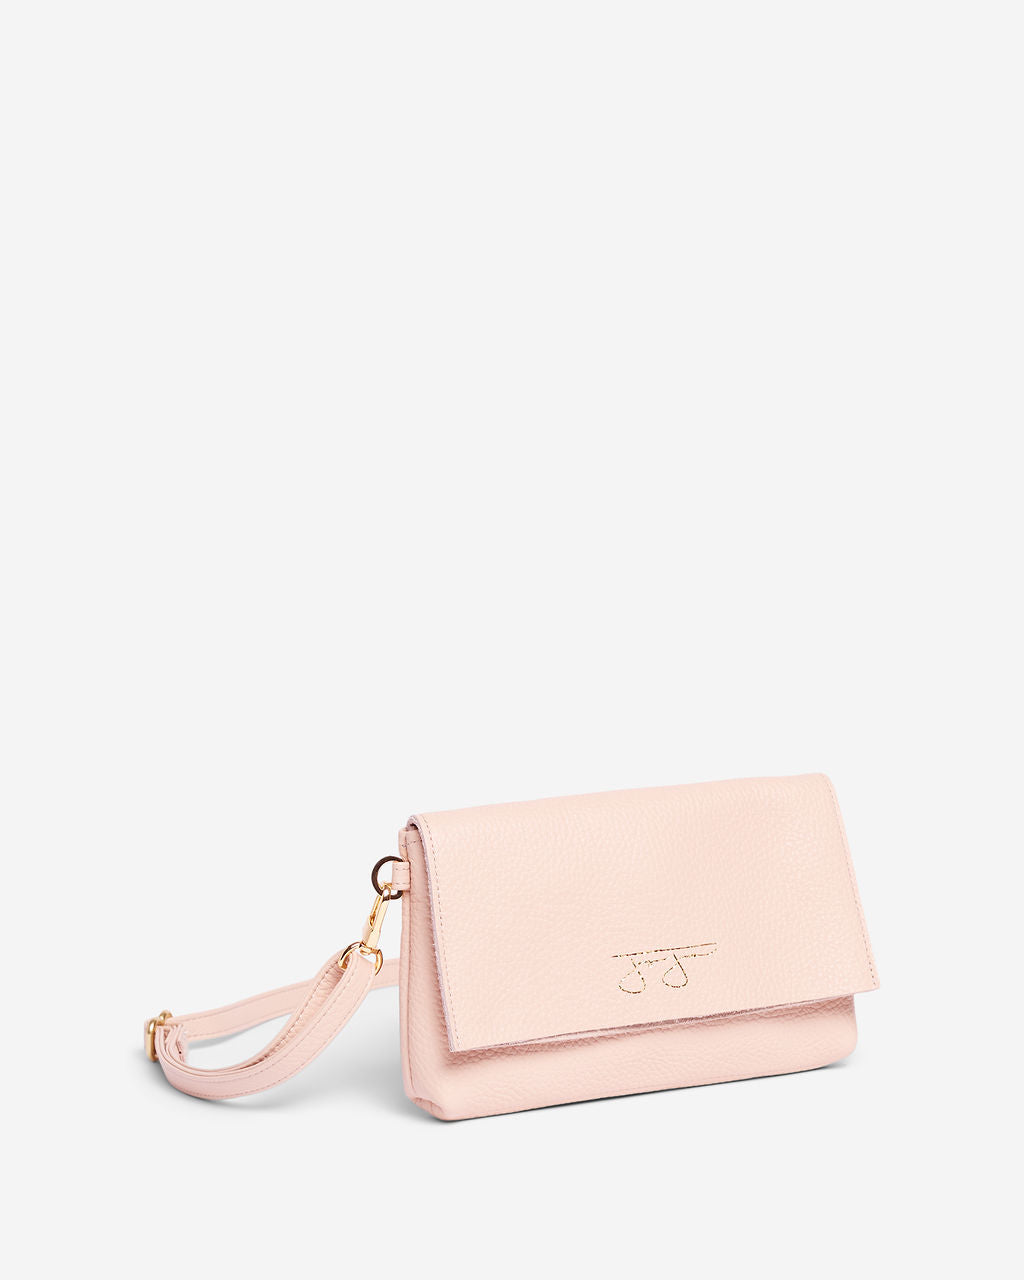 Norma Hipster Bag - Blush  Joey James, The Label   